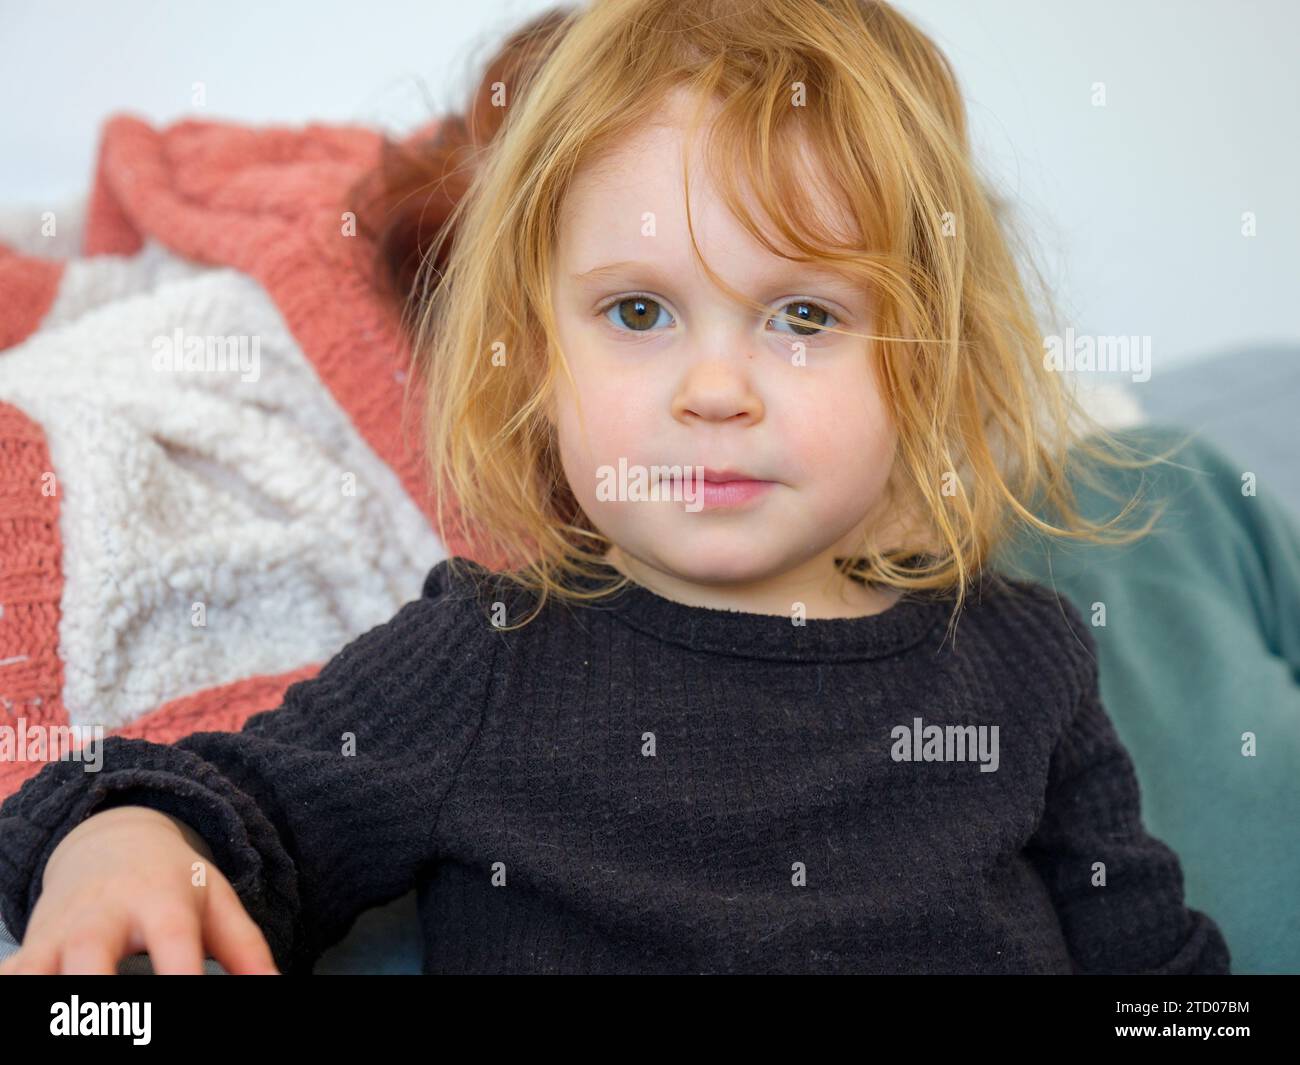 Innocent child in sweater looking directly at camera Stock Photo